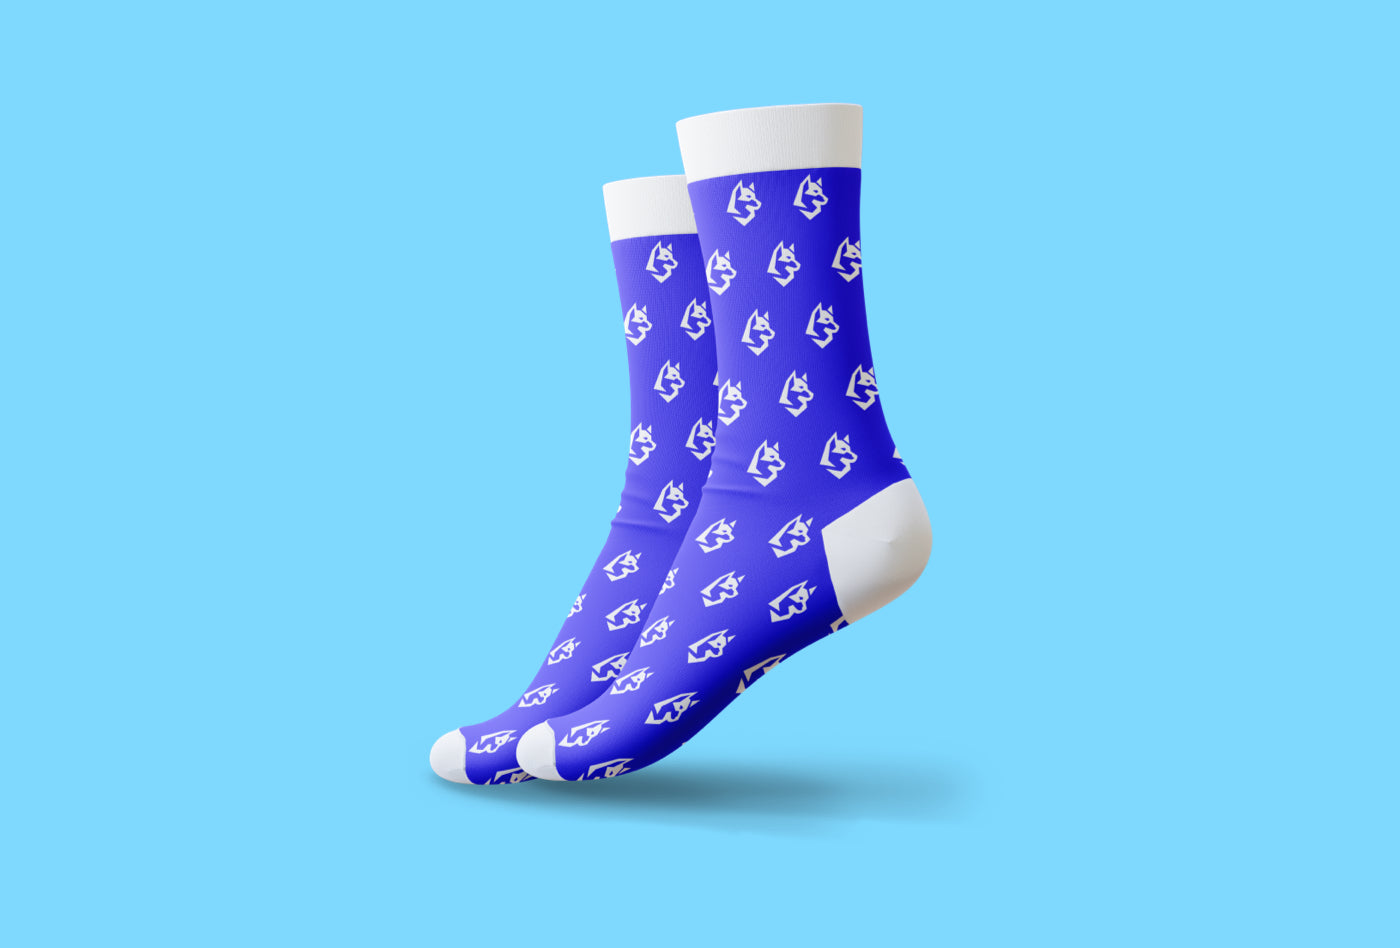 Custom Socks - Branded Swag and Merchandise for Events and Conferences